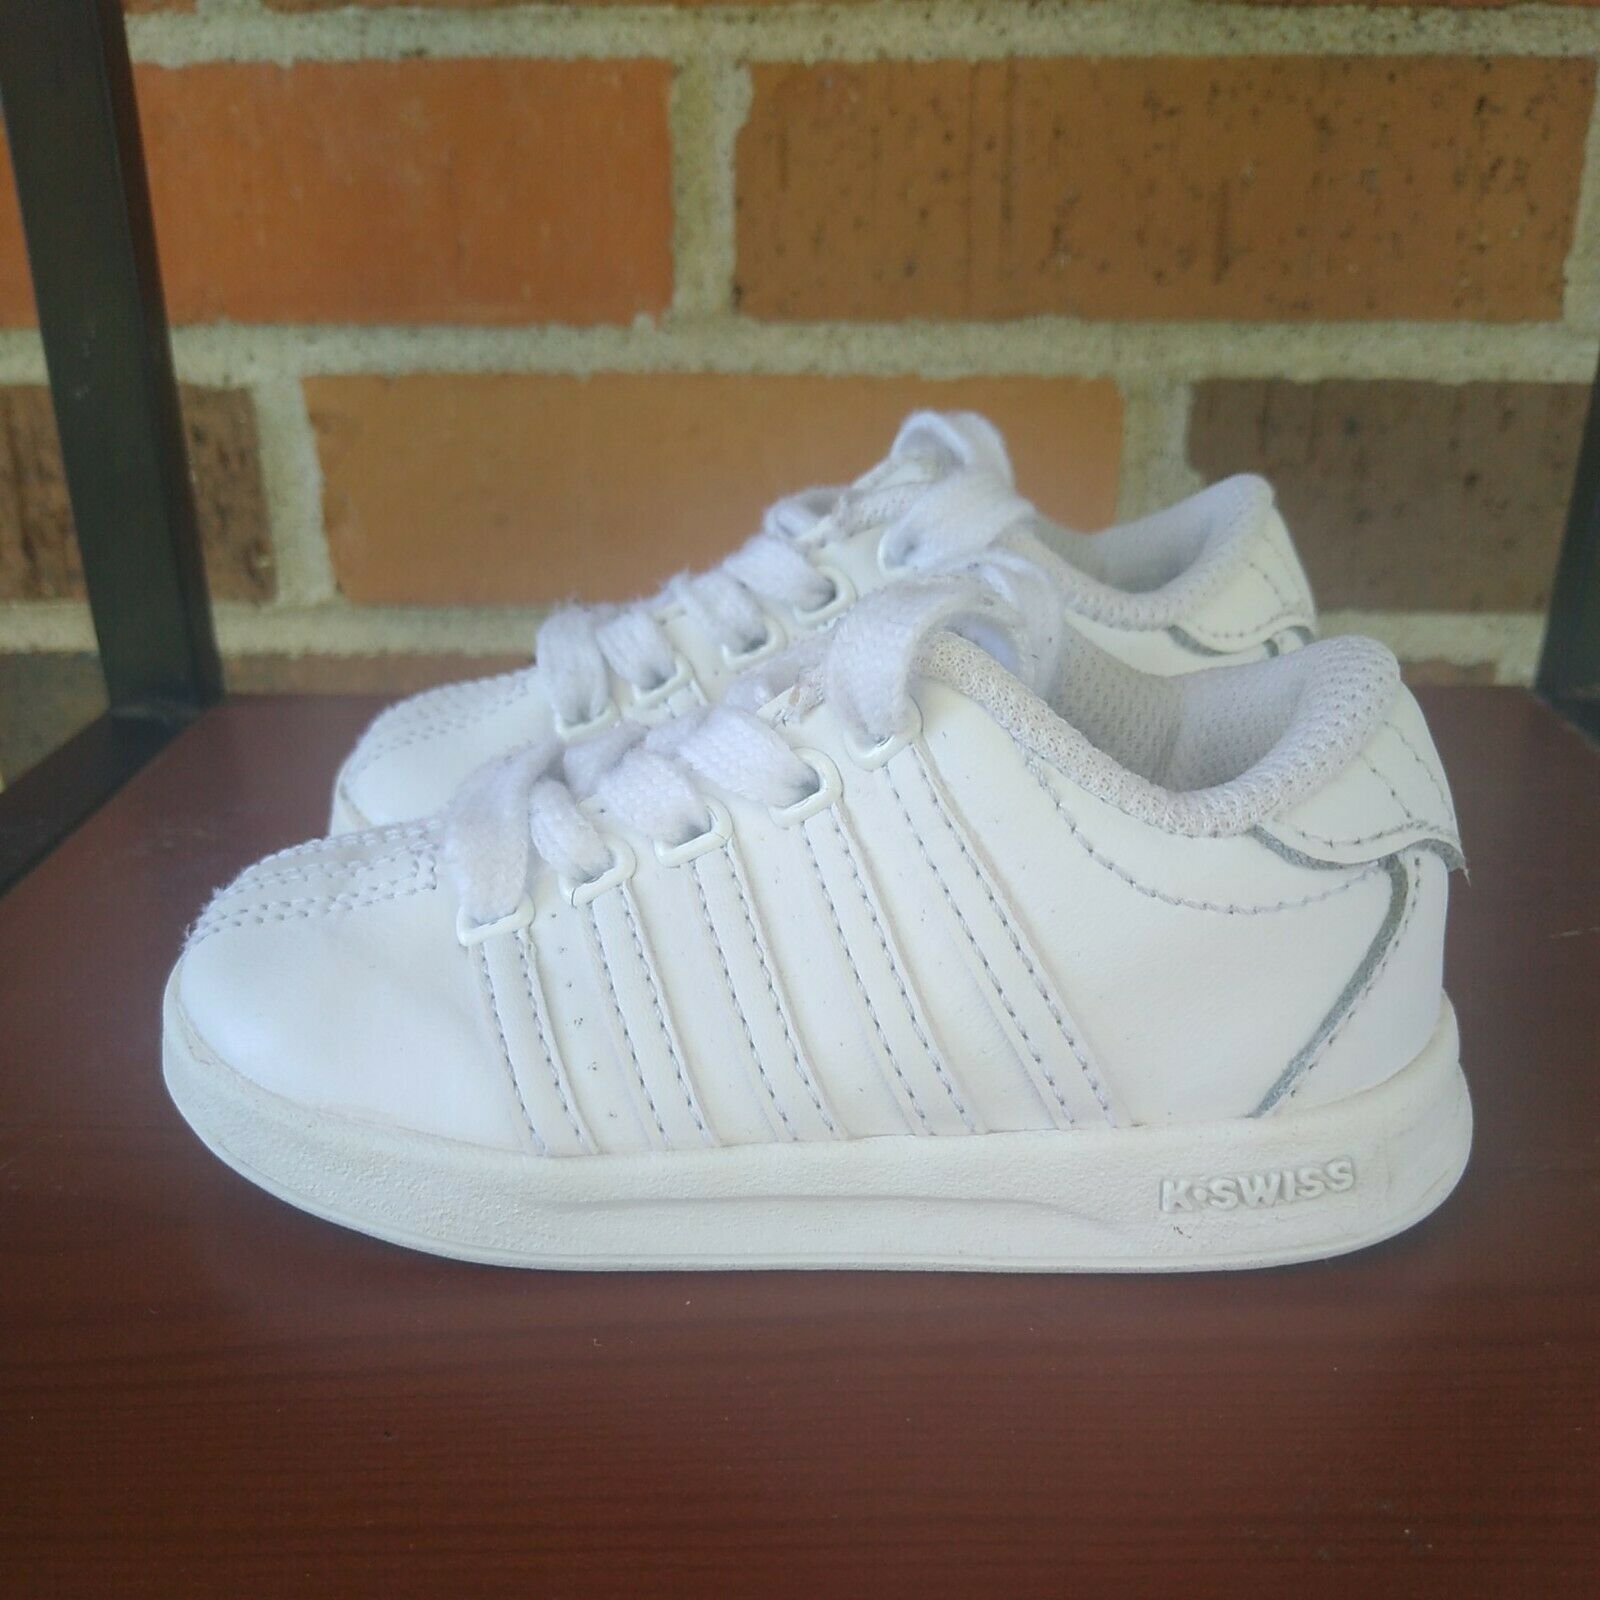 K-Swiss Classic 20100 White Leather Infant Toddler Shoes SZ 5